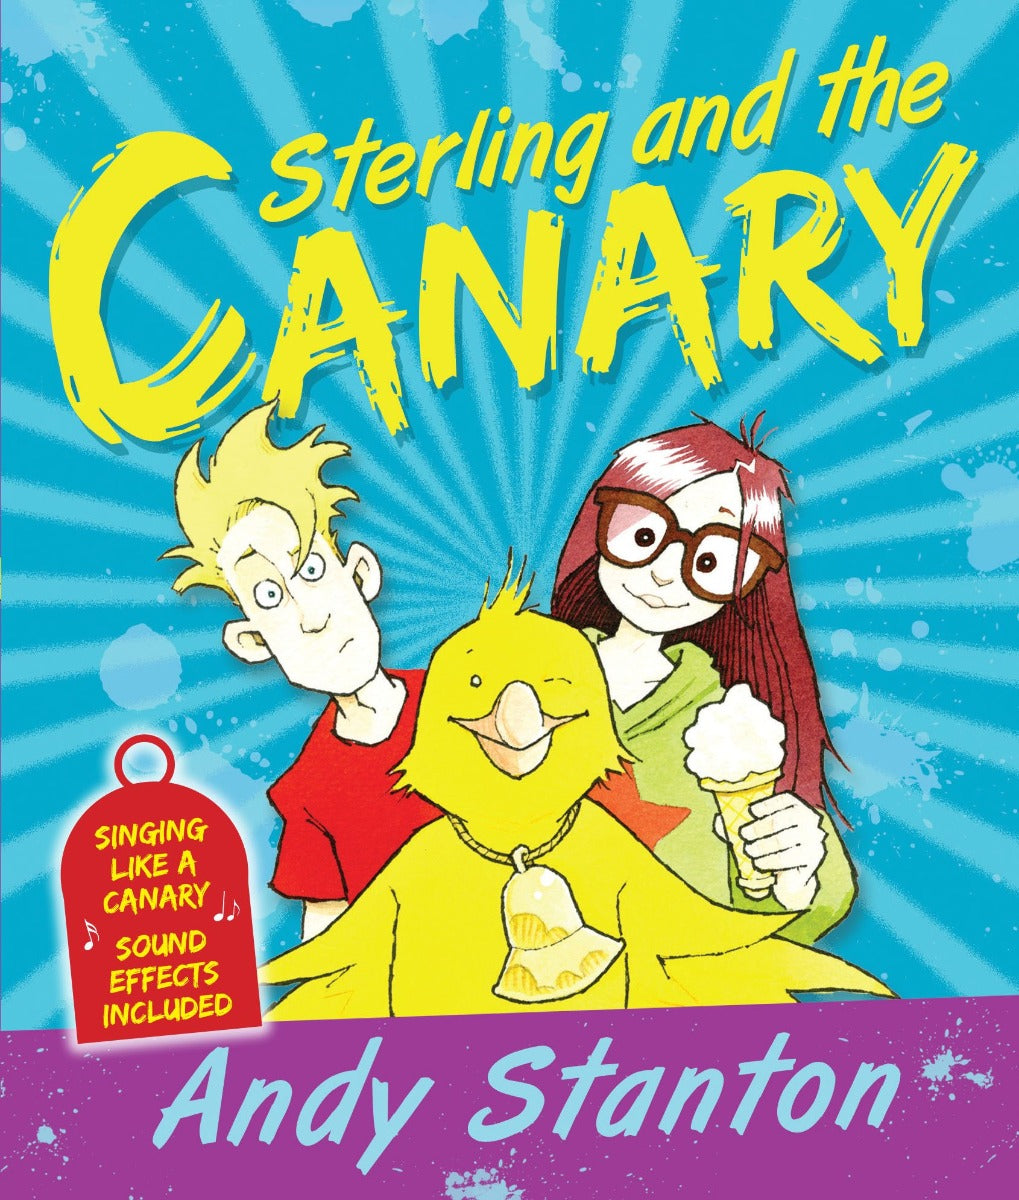 Sterling and the Canary